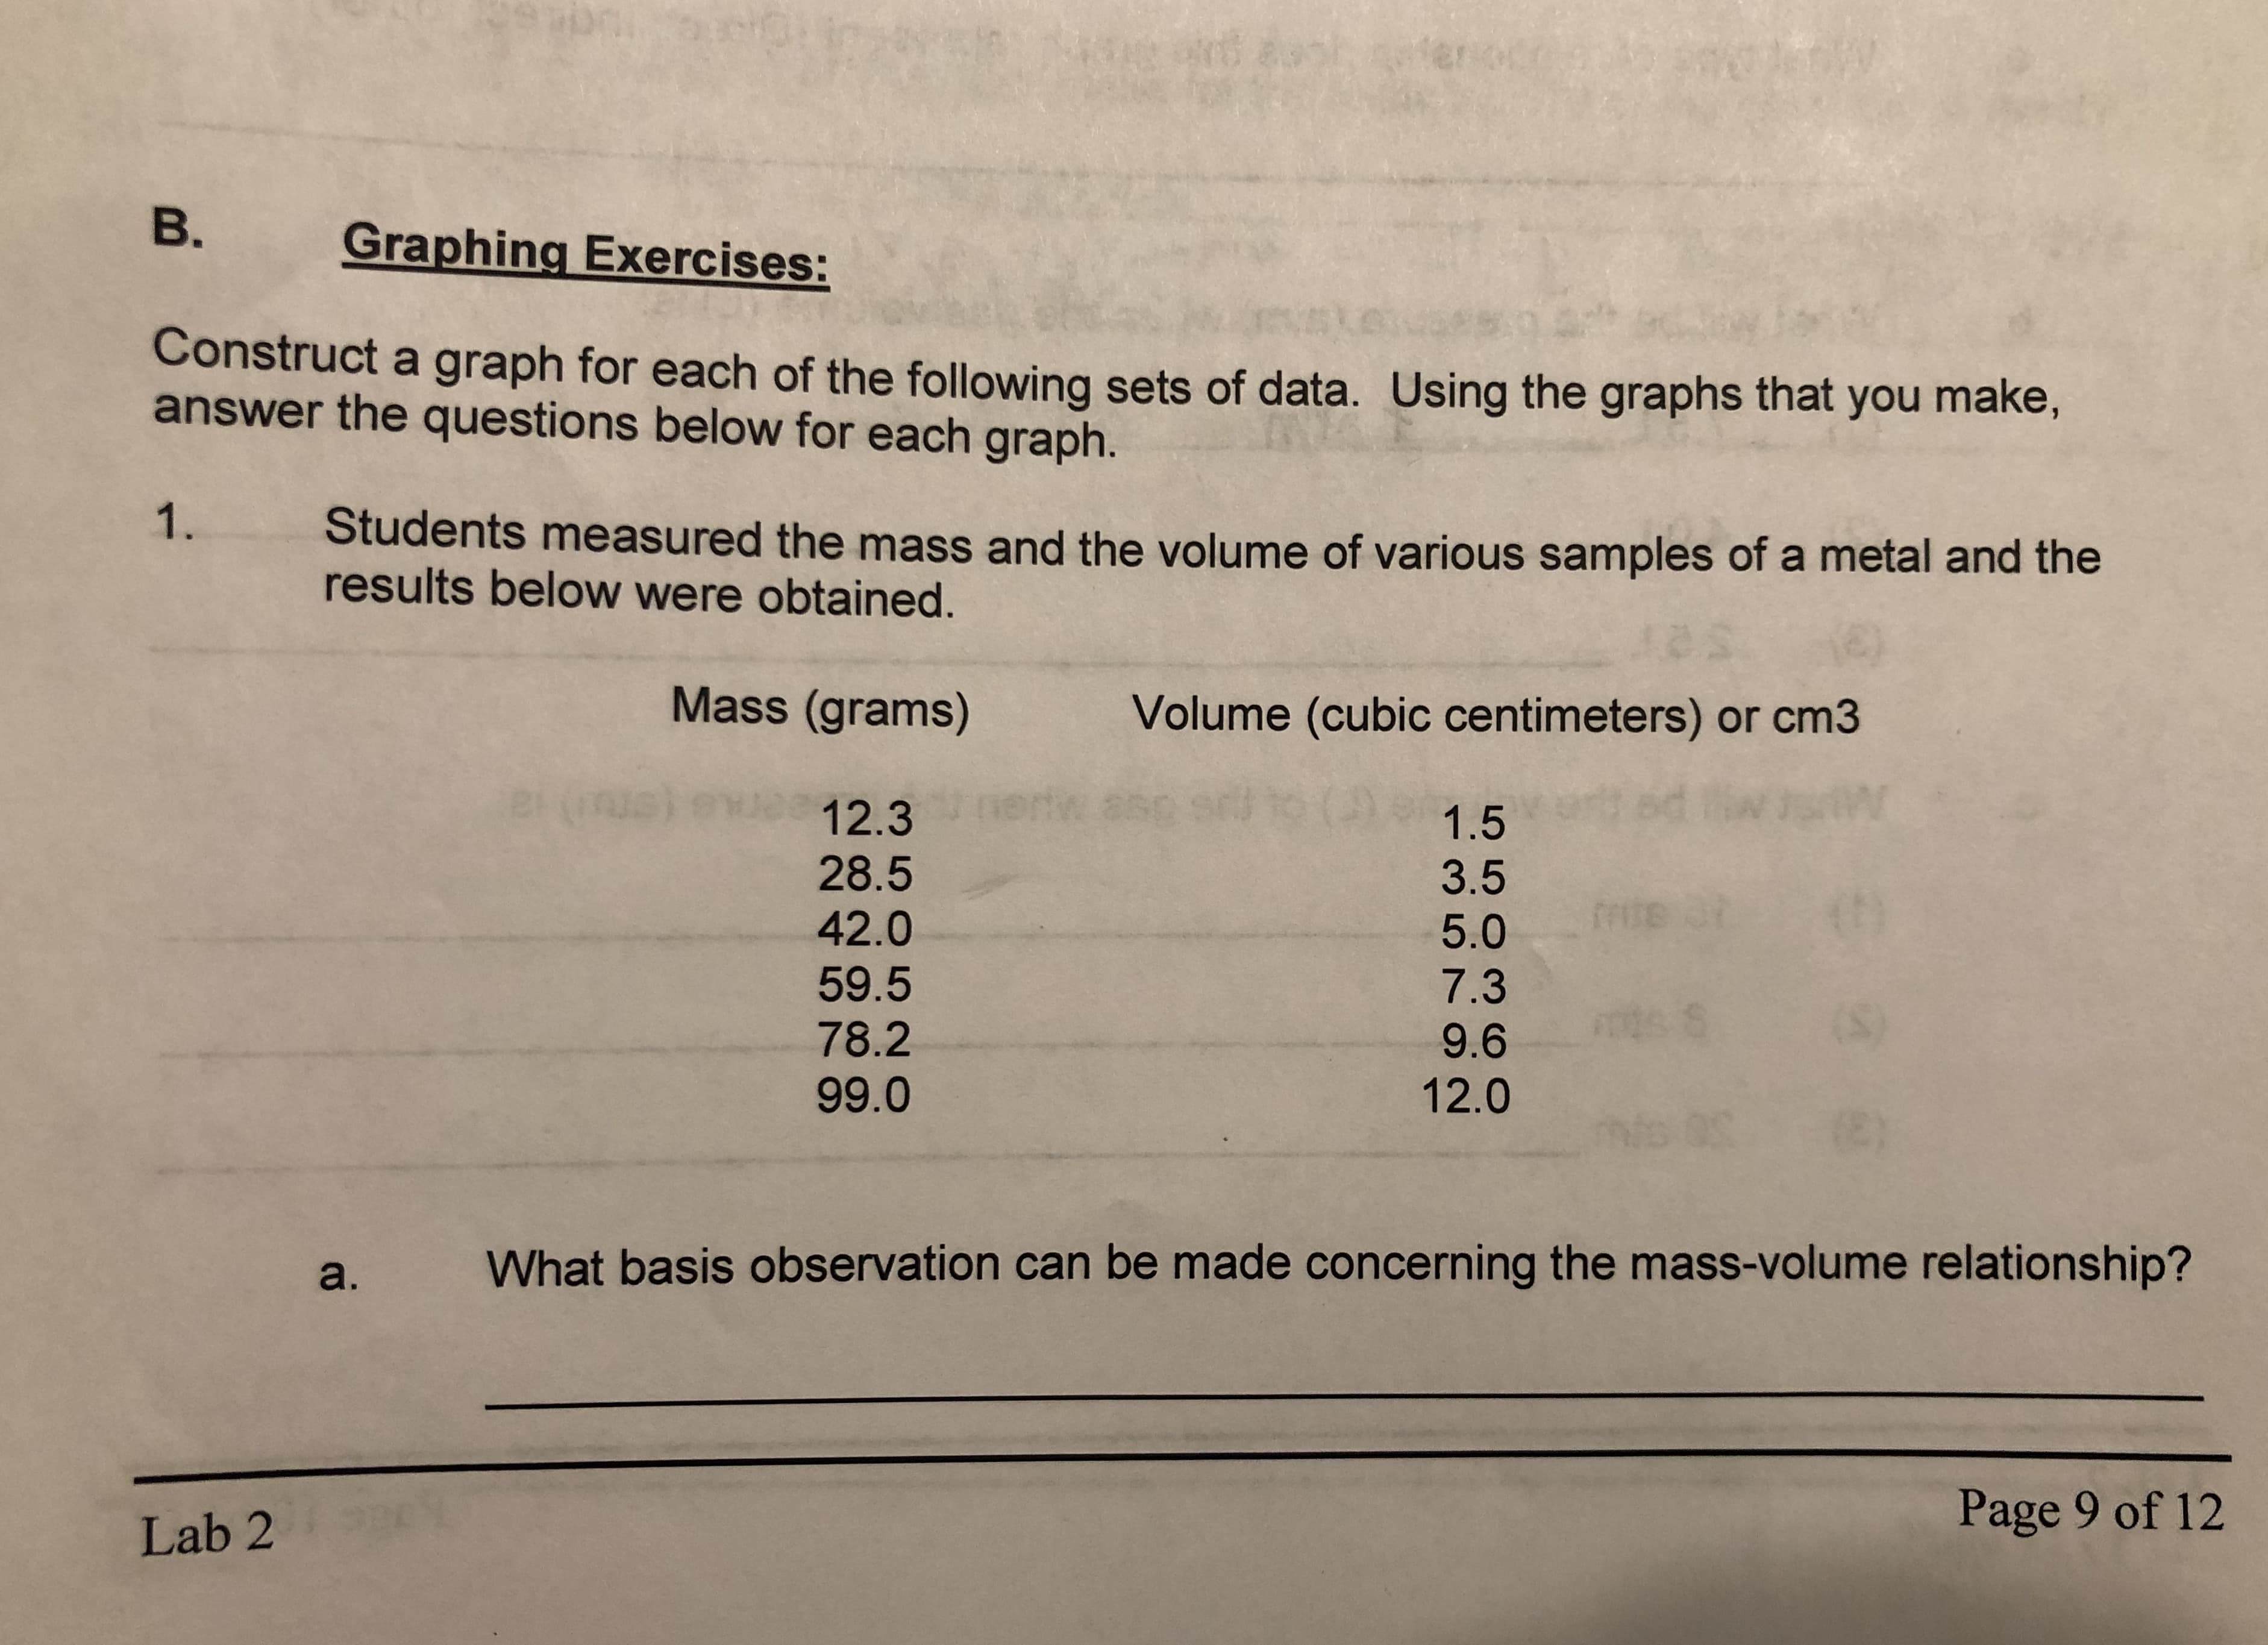 er
B.
Graphing Exercises:
Construct a graph for each of the following sets of data. Using the graphs that you make,
answer the questions below for each graph.
1.
Students measured the mass and the volume of various samples of a metal and the
results below were obtained.
Mass (grams)
Volume (cubic centimeters) or cm3
()1.5
12.3
28.5
3.5
frie
42.0
5.0
59.5
7.3
(S)
78.2
9.6
12.0
99.0
What basis observation can be made concerning the mass-volume relationship?
a.
Page 9 of 12
Lab 2
